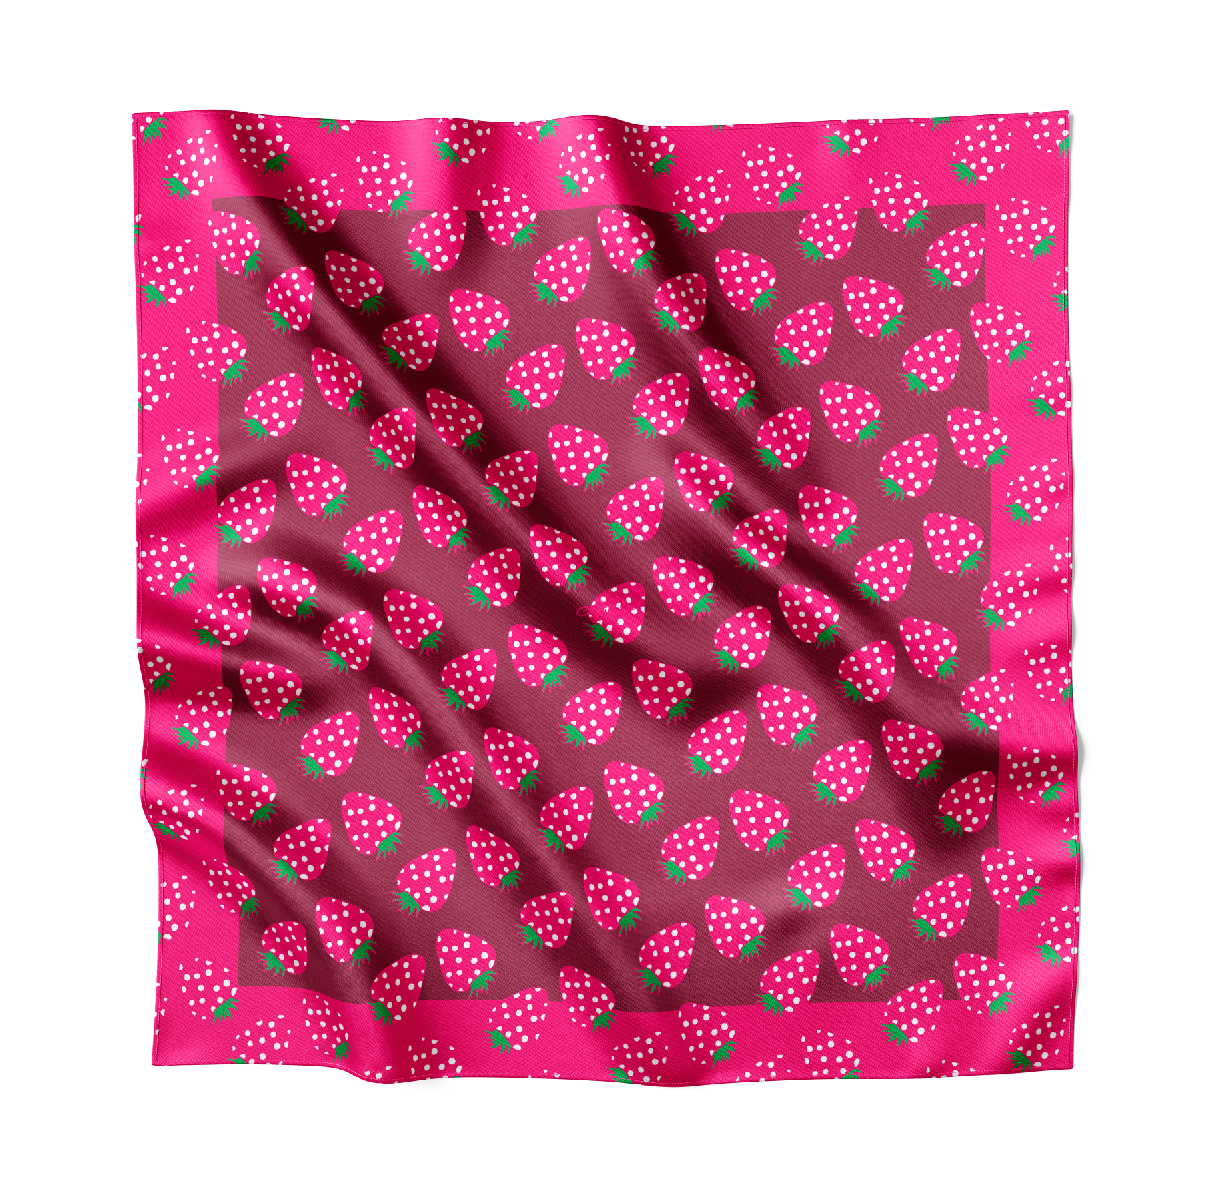 A pink silk scarf with strawberries on it.